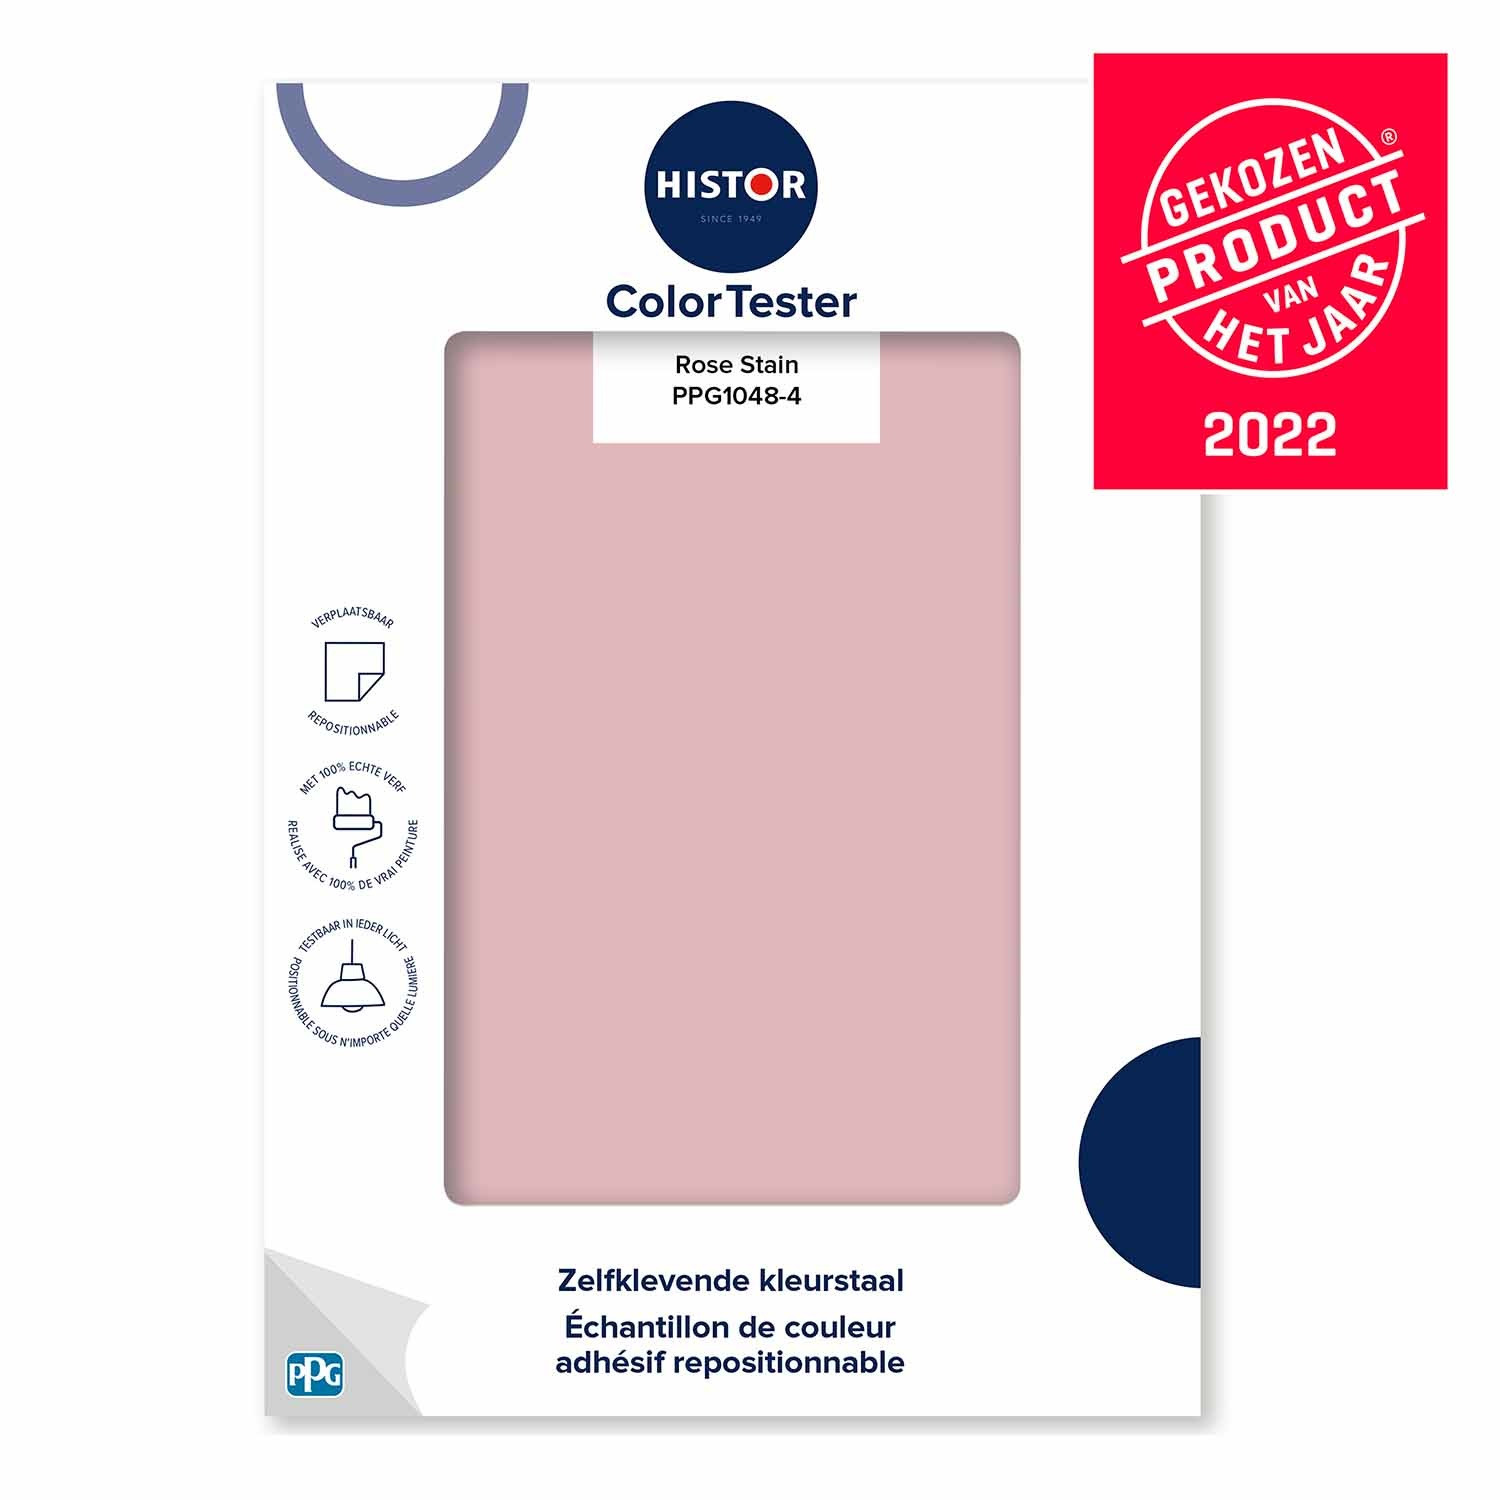 Histor Colortester 1048-4 Rose Stain